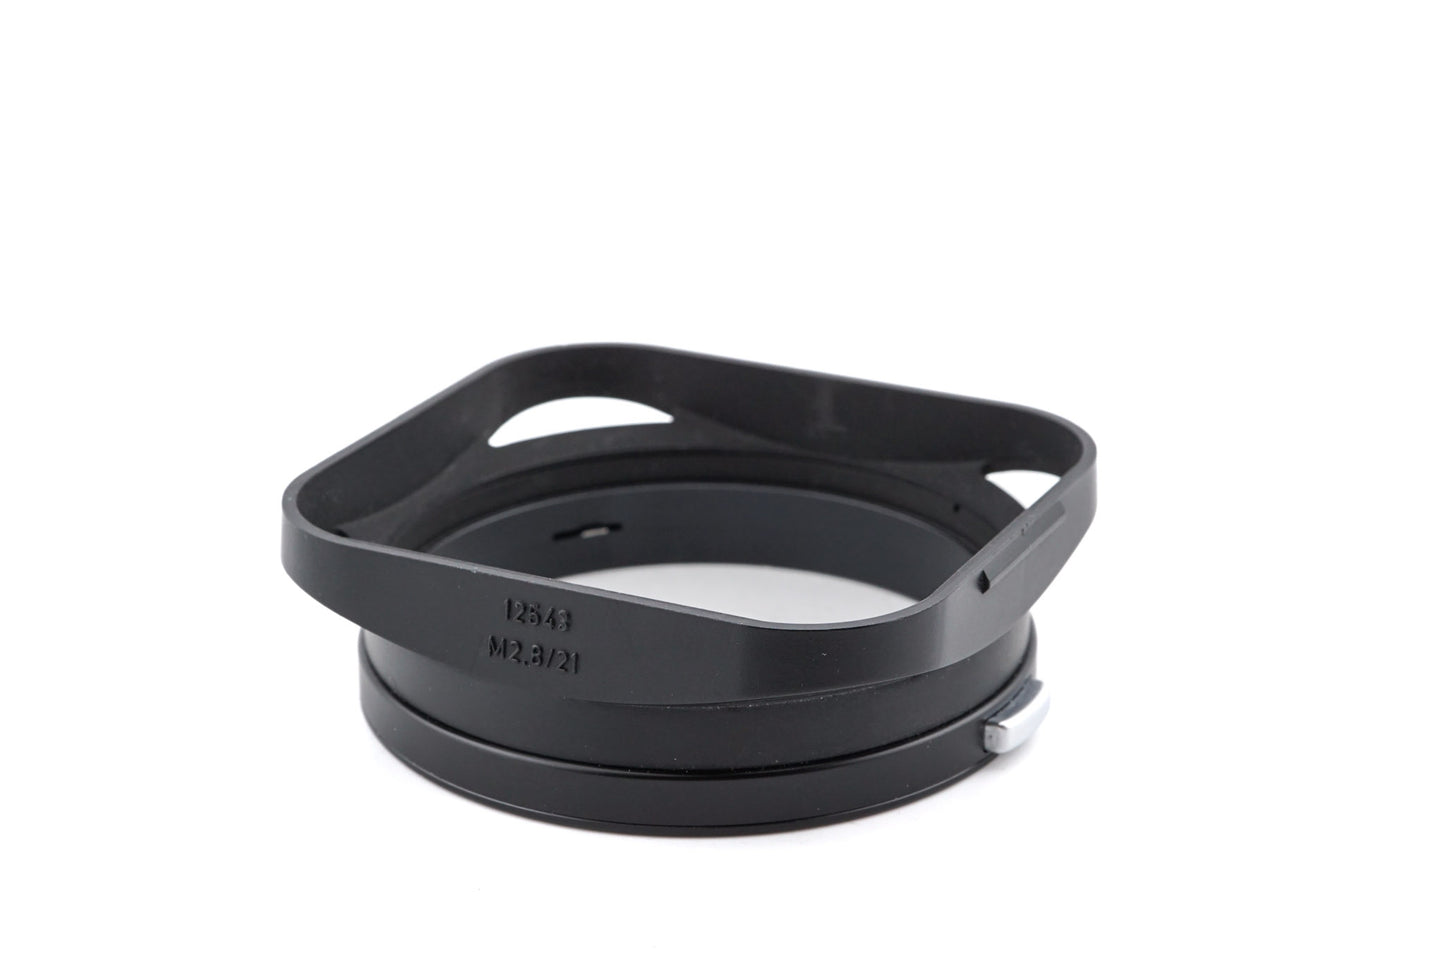 Leica Lens Hood For 21mm f2.8 (12543) - Accessory